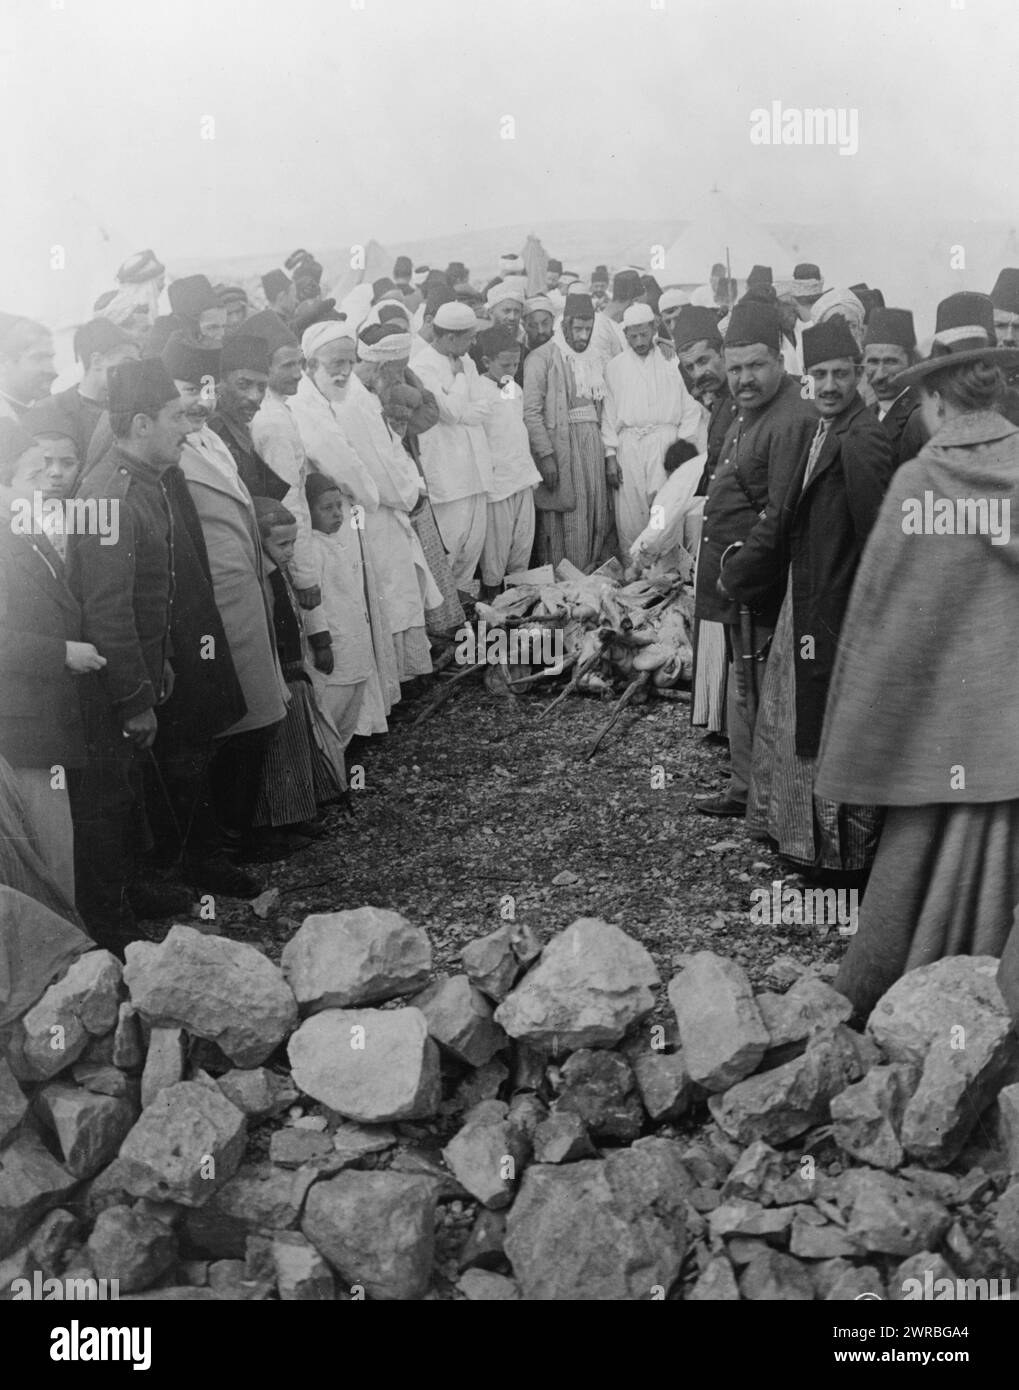 Palestine - Mt. Gerizin ie. Gerizim, Feast of the Passover, Samaritans around meat being cooked over open fire, Mount Gerizim, West Bank., between 1880 and 1922, Samaritans, Spiritual life, West Bank, Gerizim, Mount, Photographic prints, 1880-1920., Photographic prints, 1880-1920, 1 photographic print Stock Photo